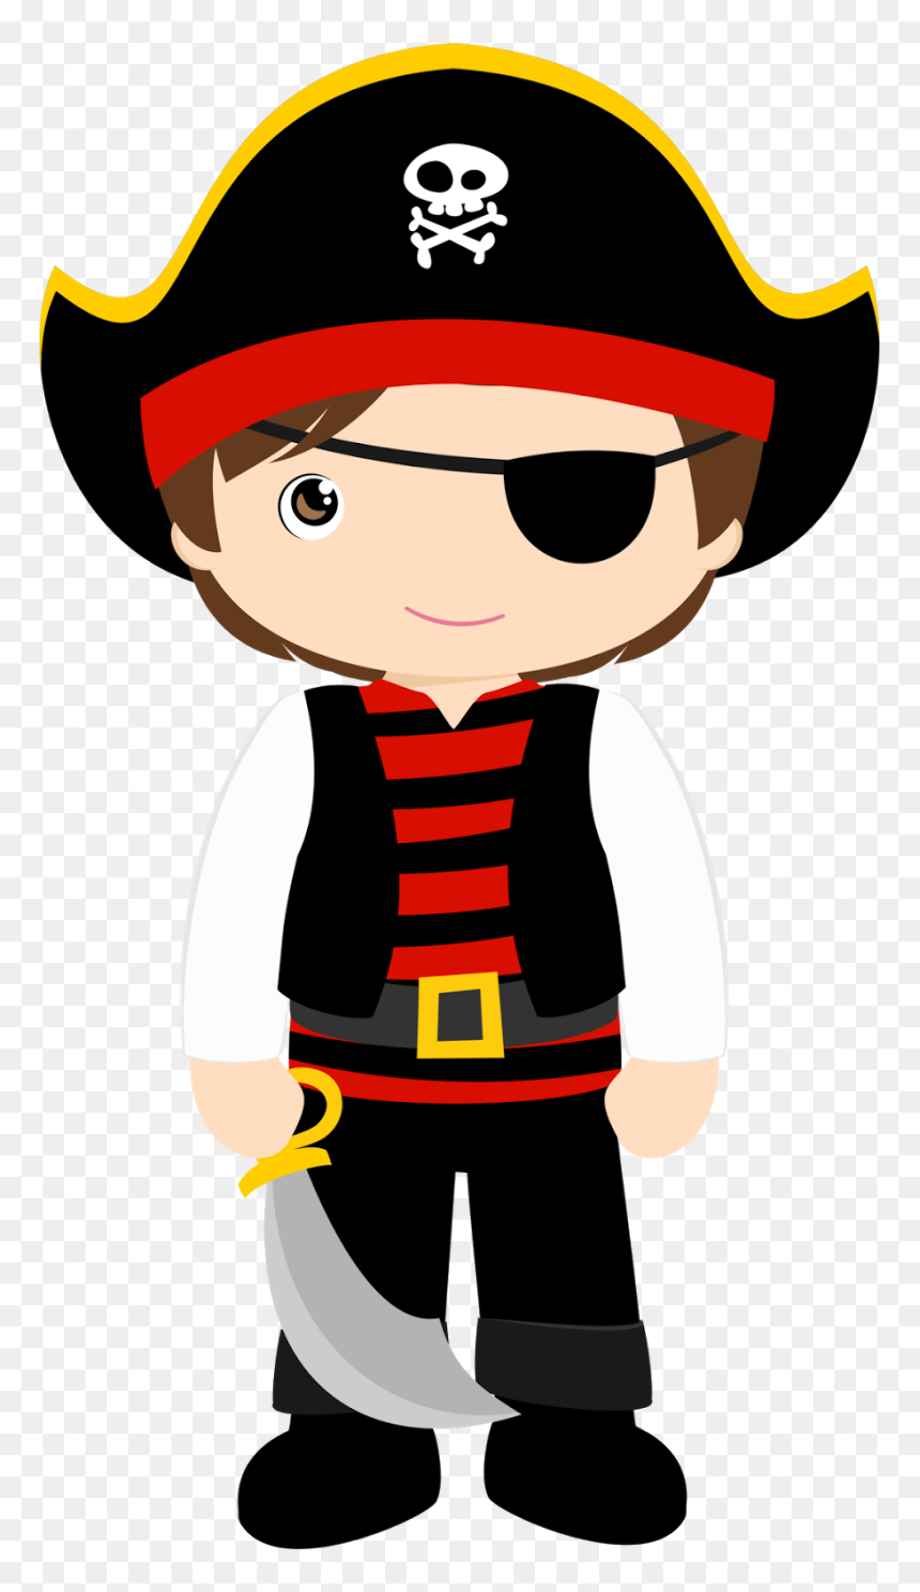 Pirates Clipart Cartoon And Other Clipart Images On Cliparts Pub | My ...